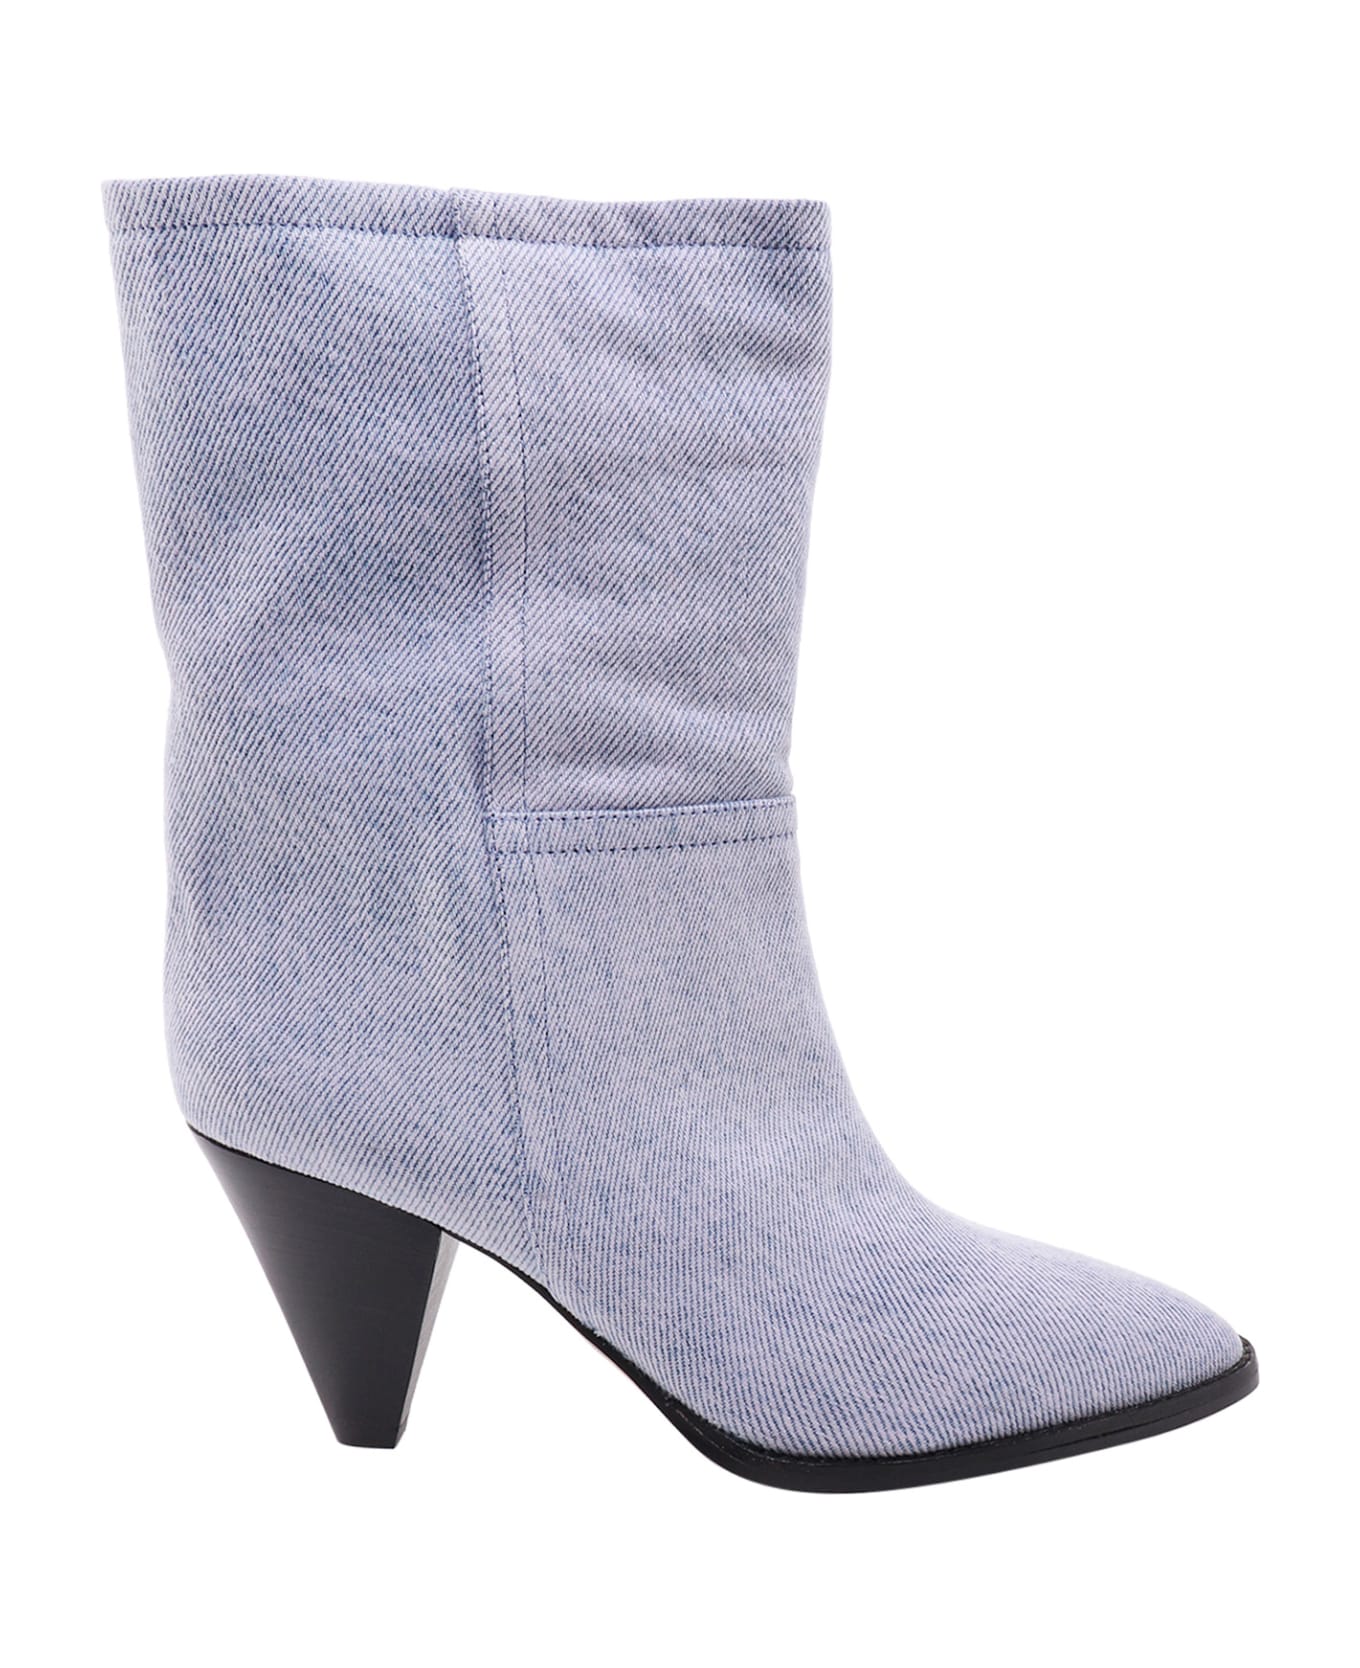 Isabel Marant Rouxa Ankle Boots - Purple ブーツ